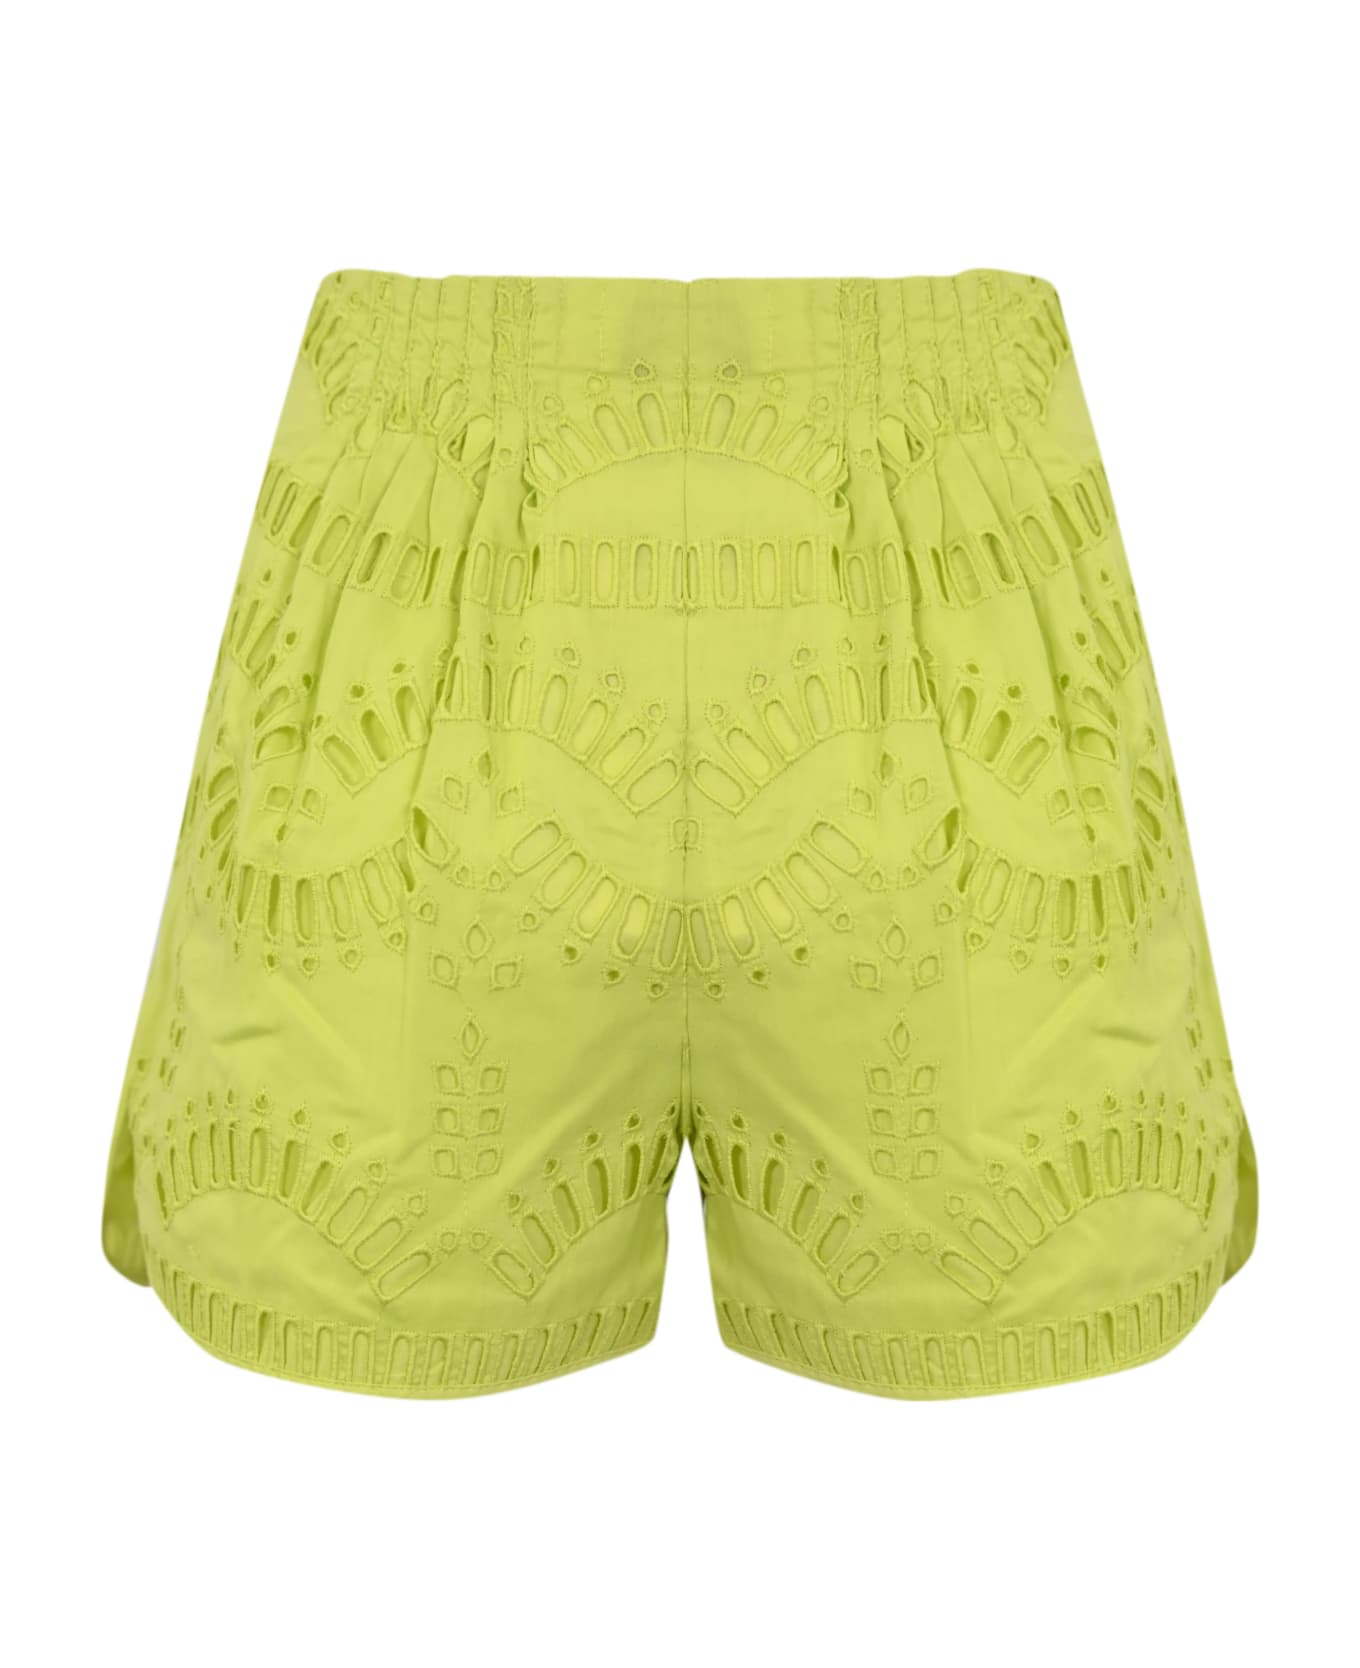 Charo Ruiz Palok Shorts In Broderie Anglaise - Lime punch